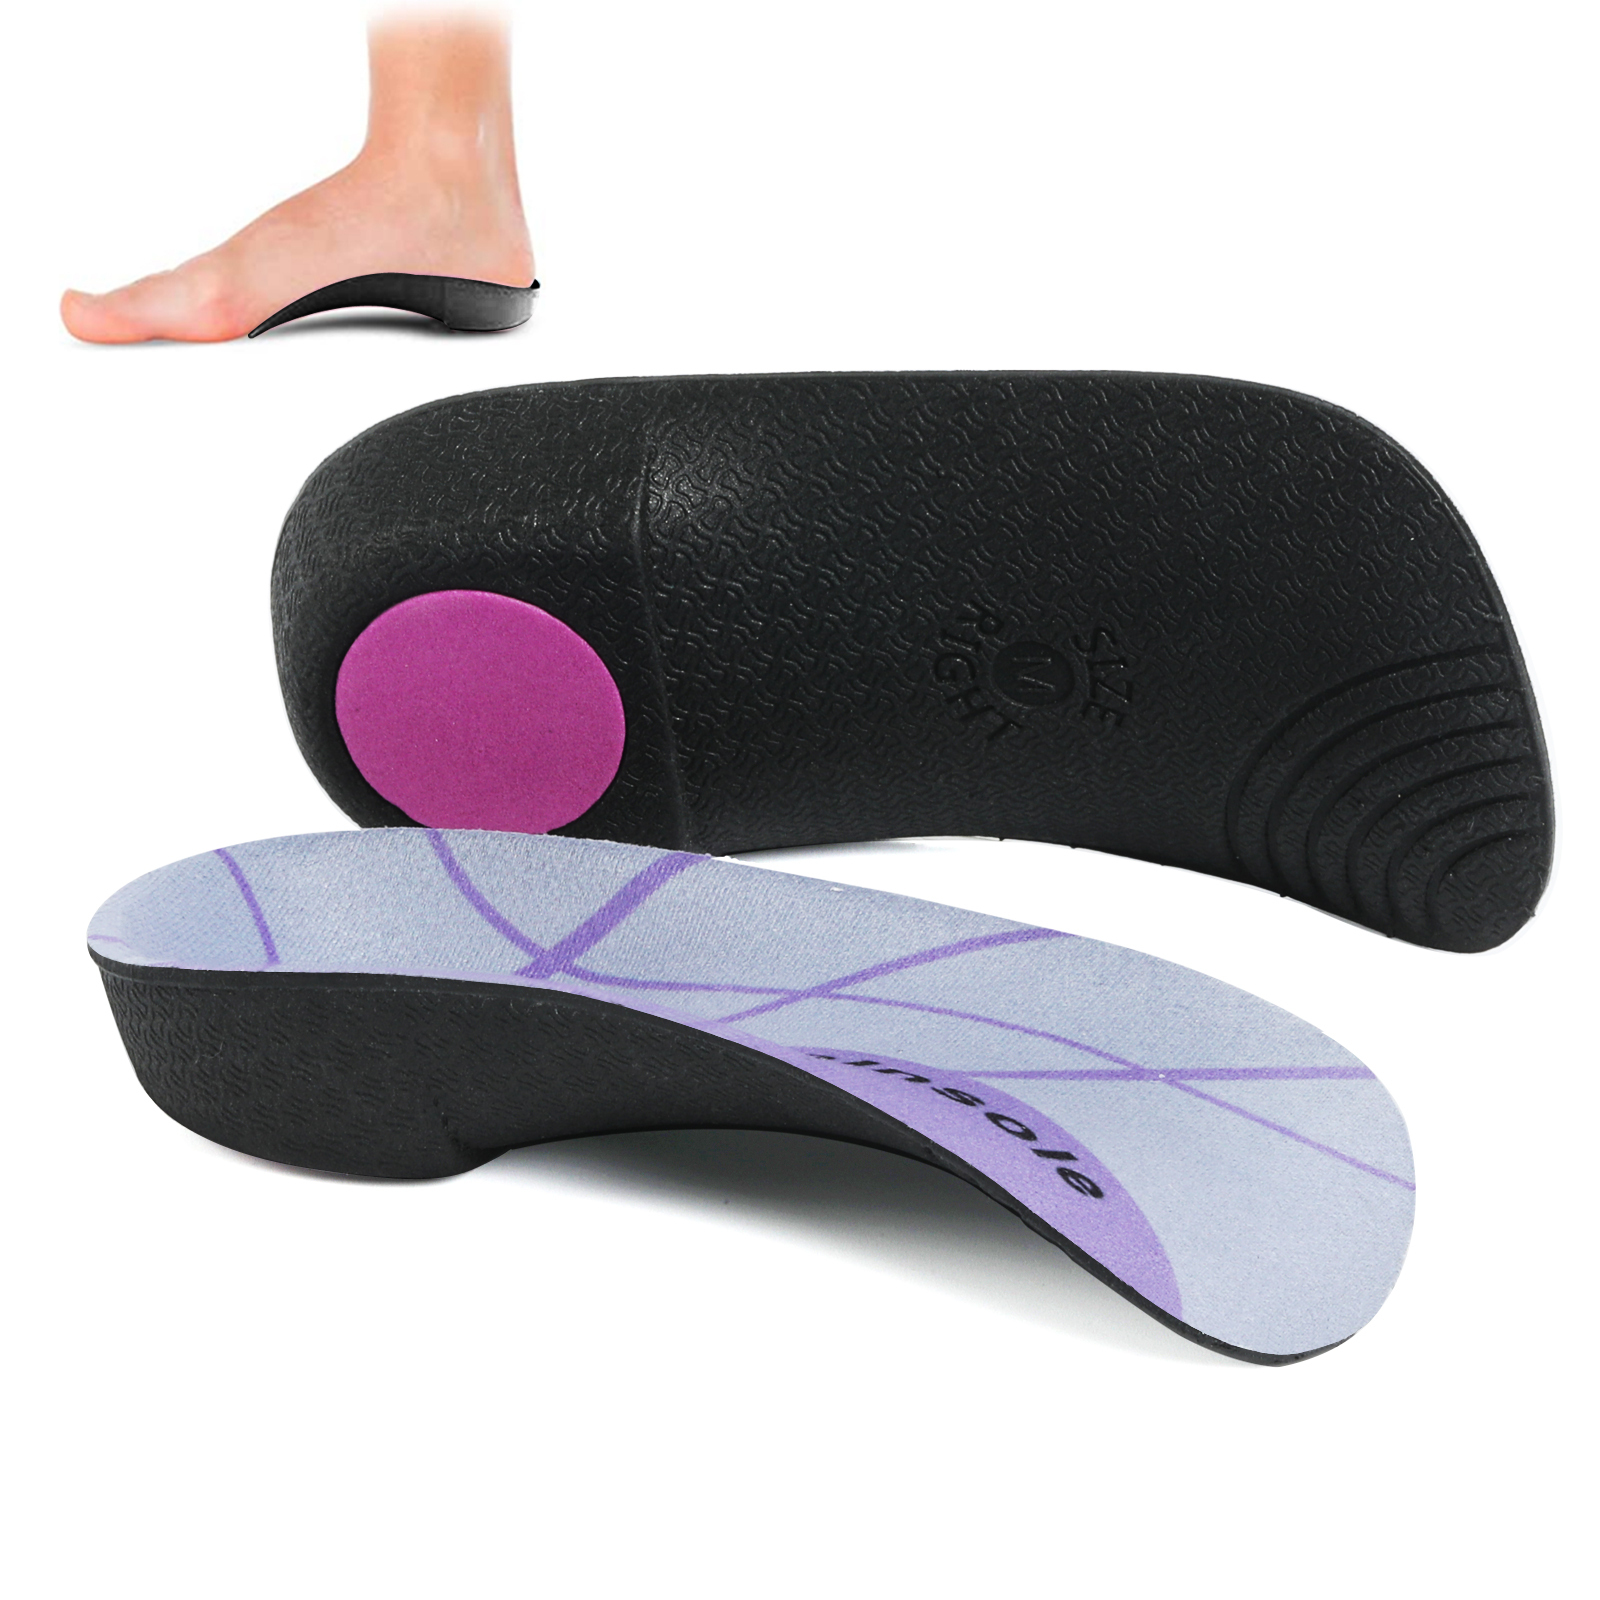 Plantar Fasciitis 34 Length Insoles High Arch Supports Orthotic